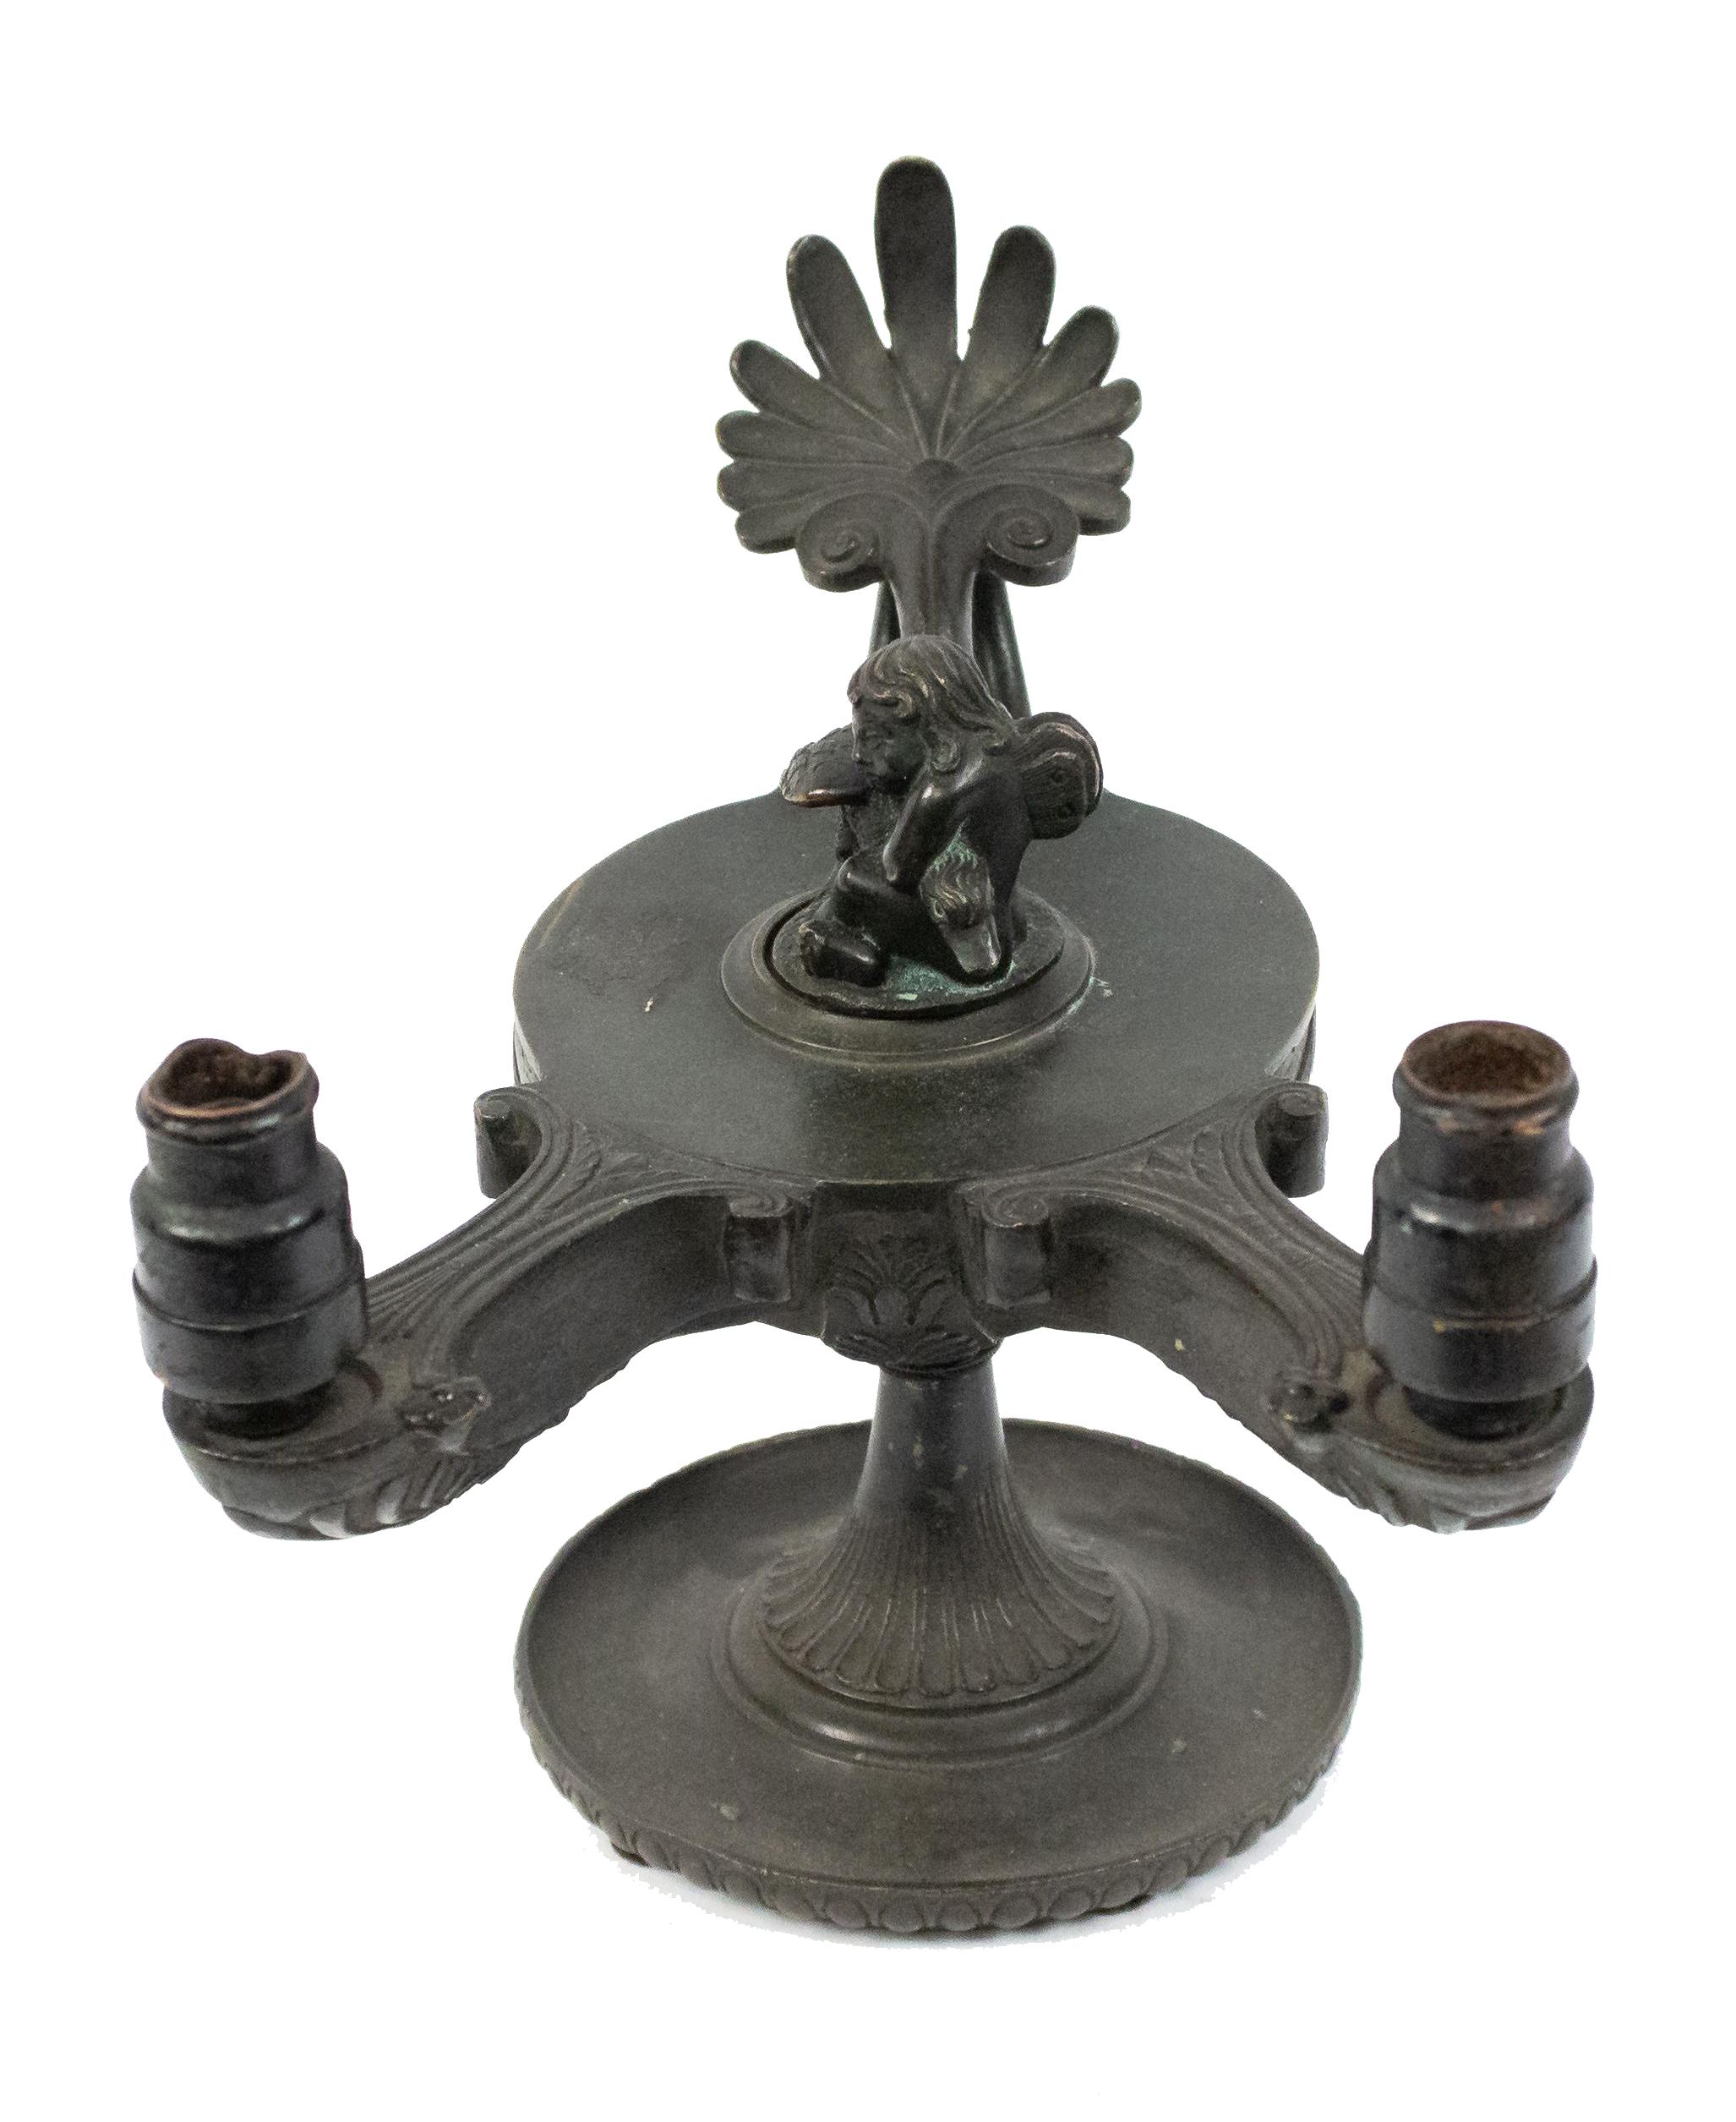 Italian Renaissance style (19th Cent) bronze aladdin lamp with 2 burners and scroll relief with cupid and bird finial.
